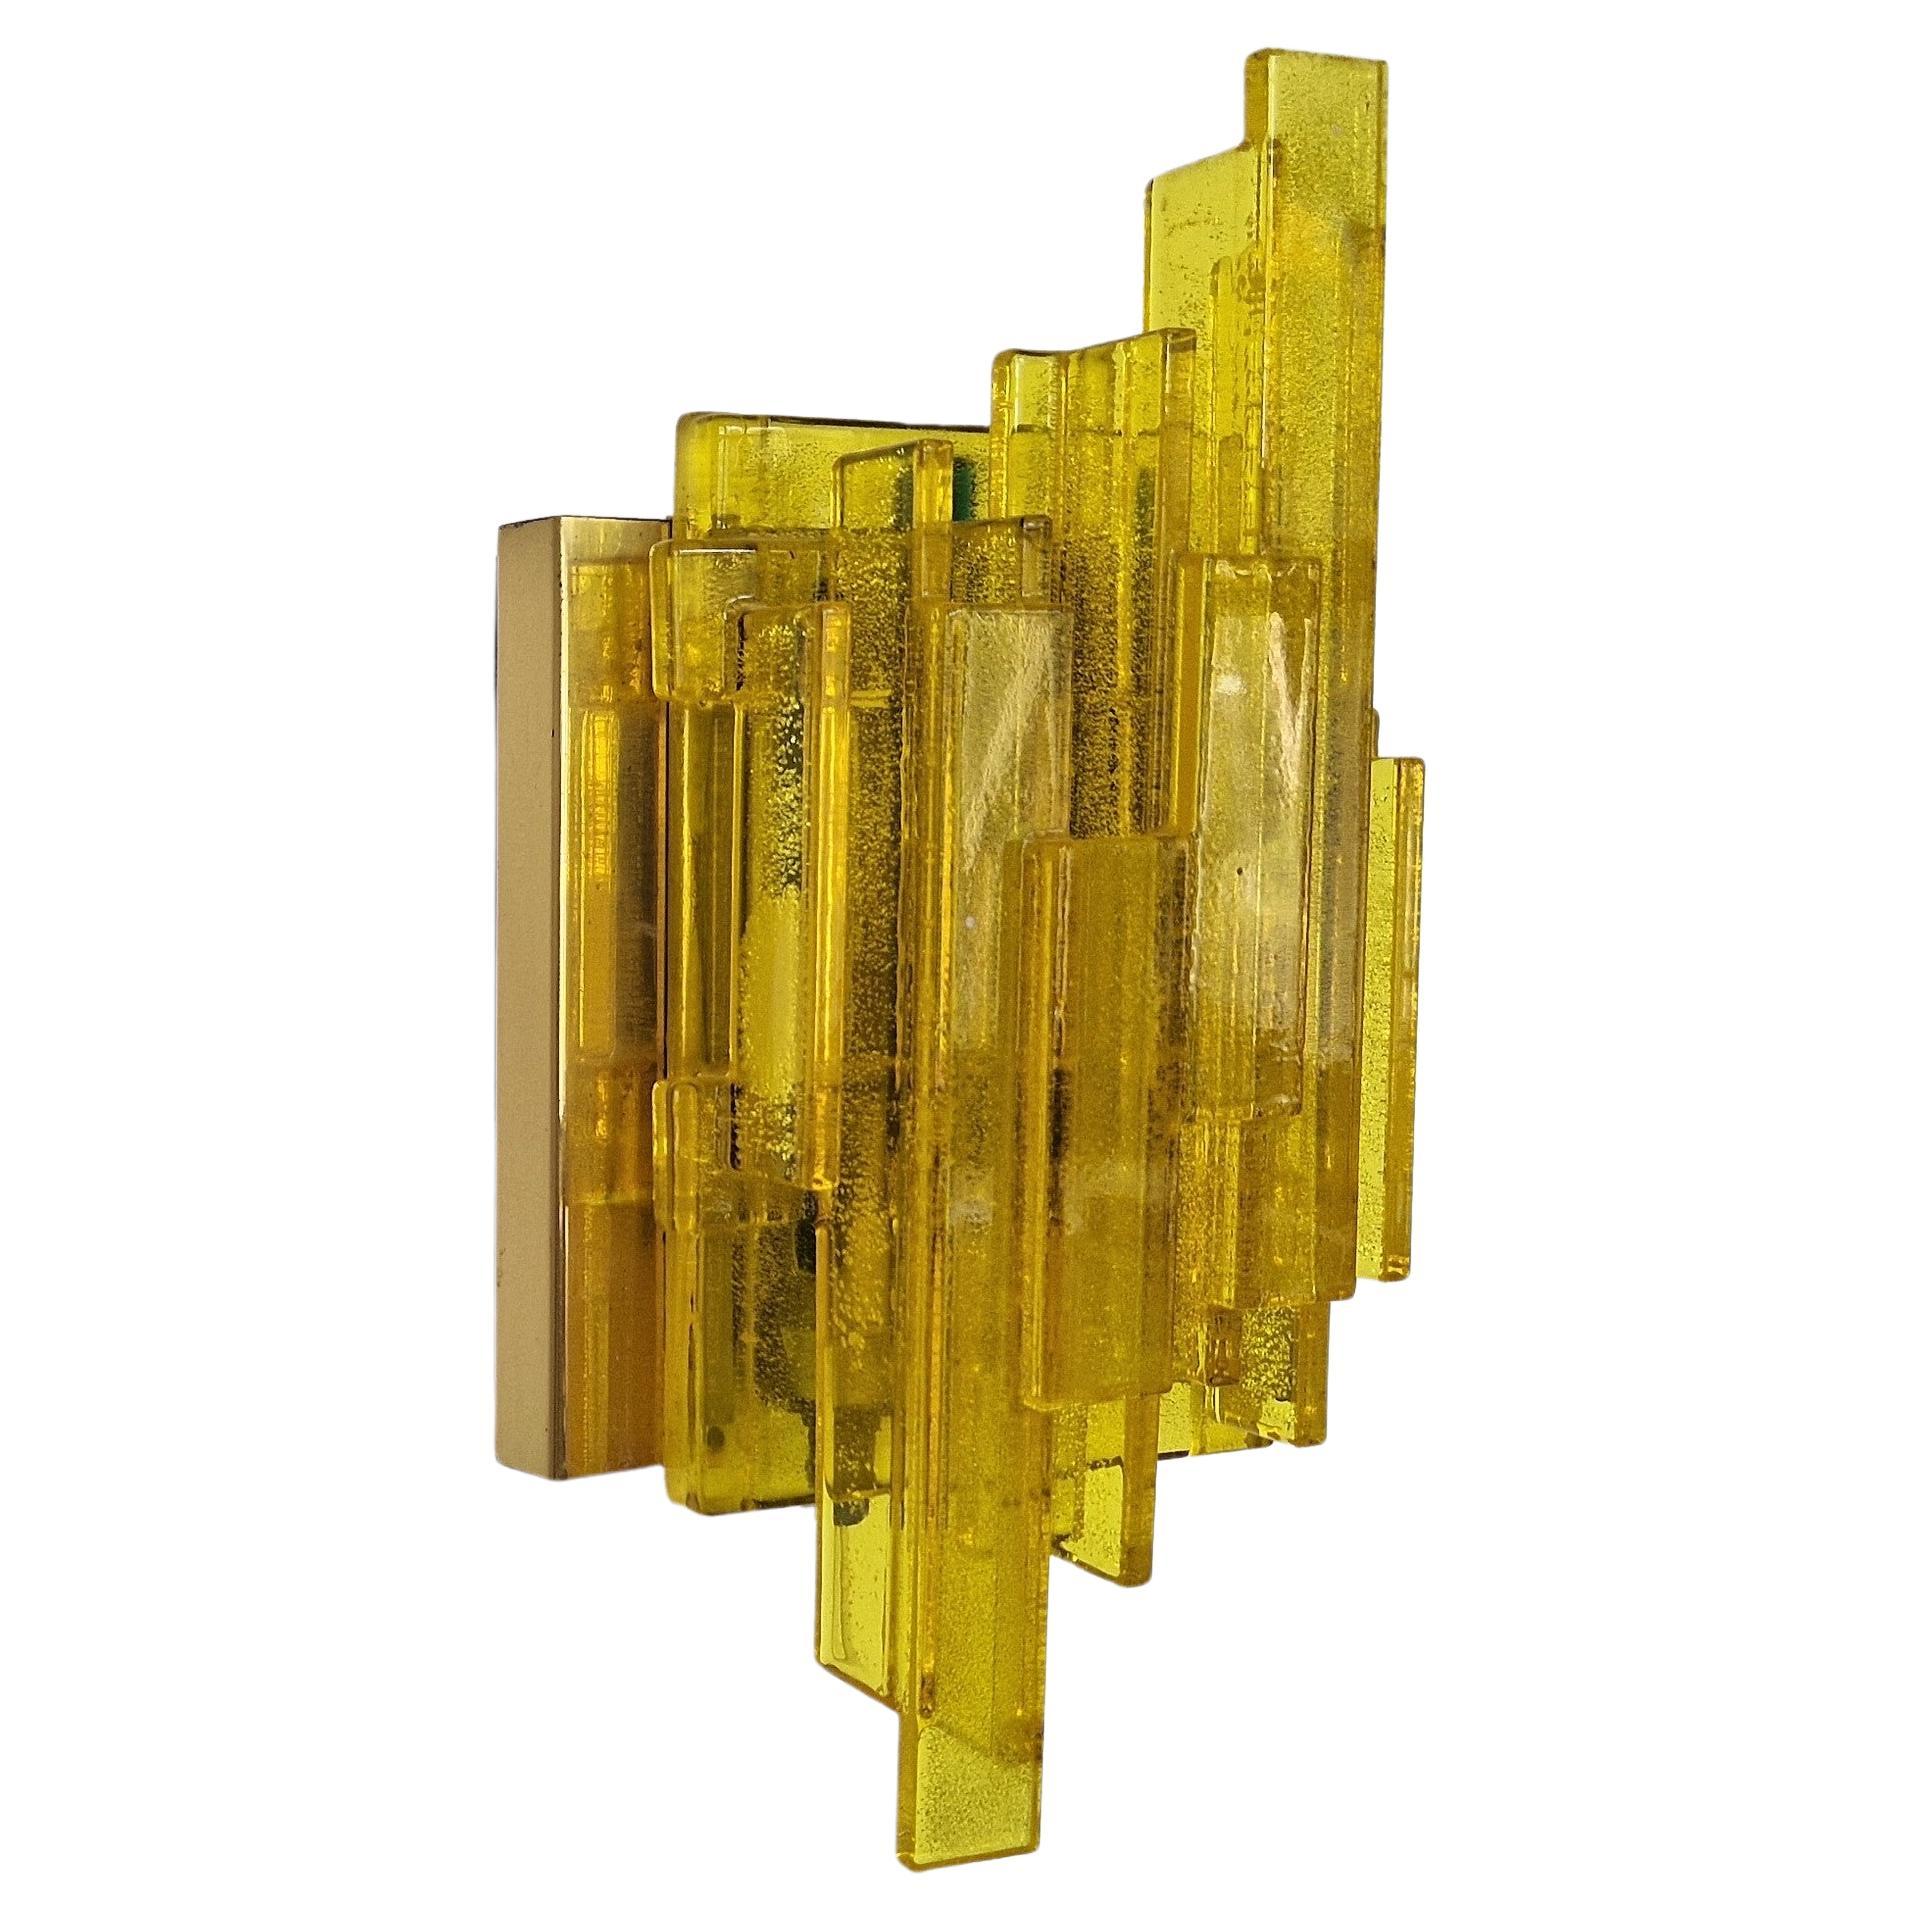 Yellow Acrylic and Metal Wall Lamp by Claus Bolby for Cebo Industri